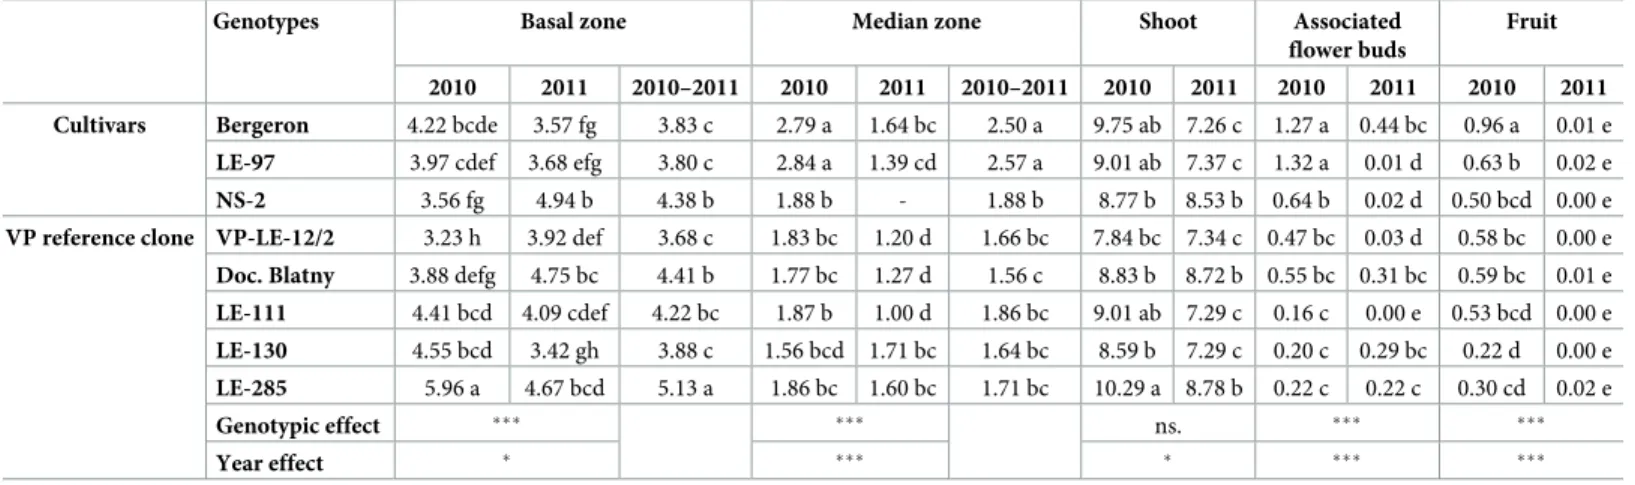 Table 1. Mean number of metamers in the basal and median zones (when present), mean number of metamers per shoot and mean number of associated flowers and fruit per shoot depending on the genotype (cvs and VP clones) and year of shoot development